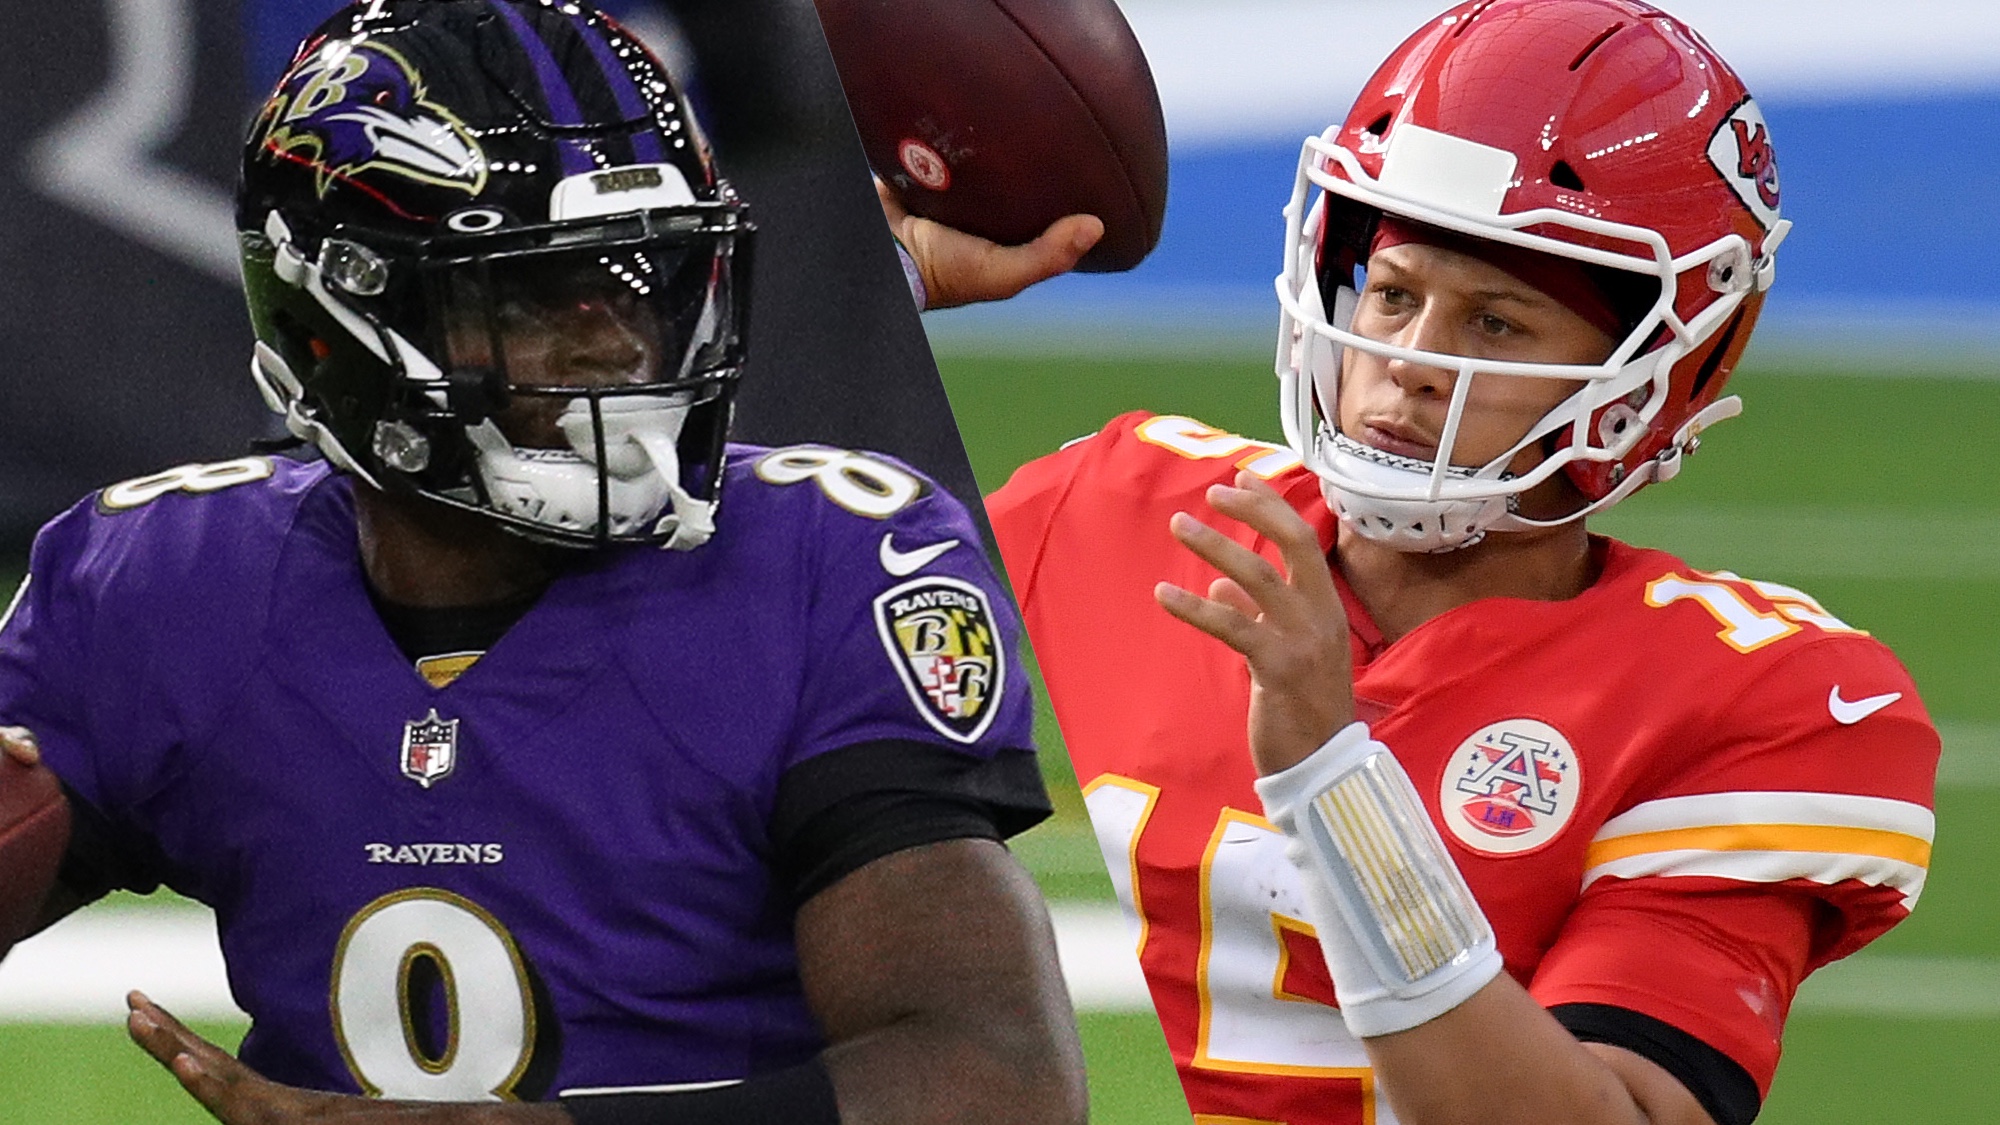 Chiefs vs Ravens live stream How to watch NFL Monday Night Football